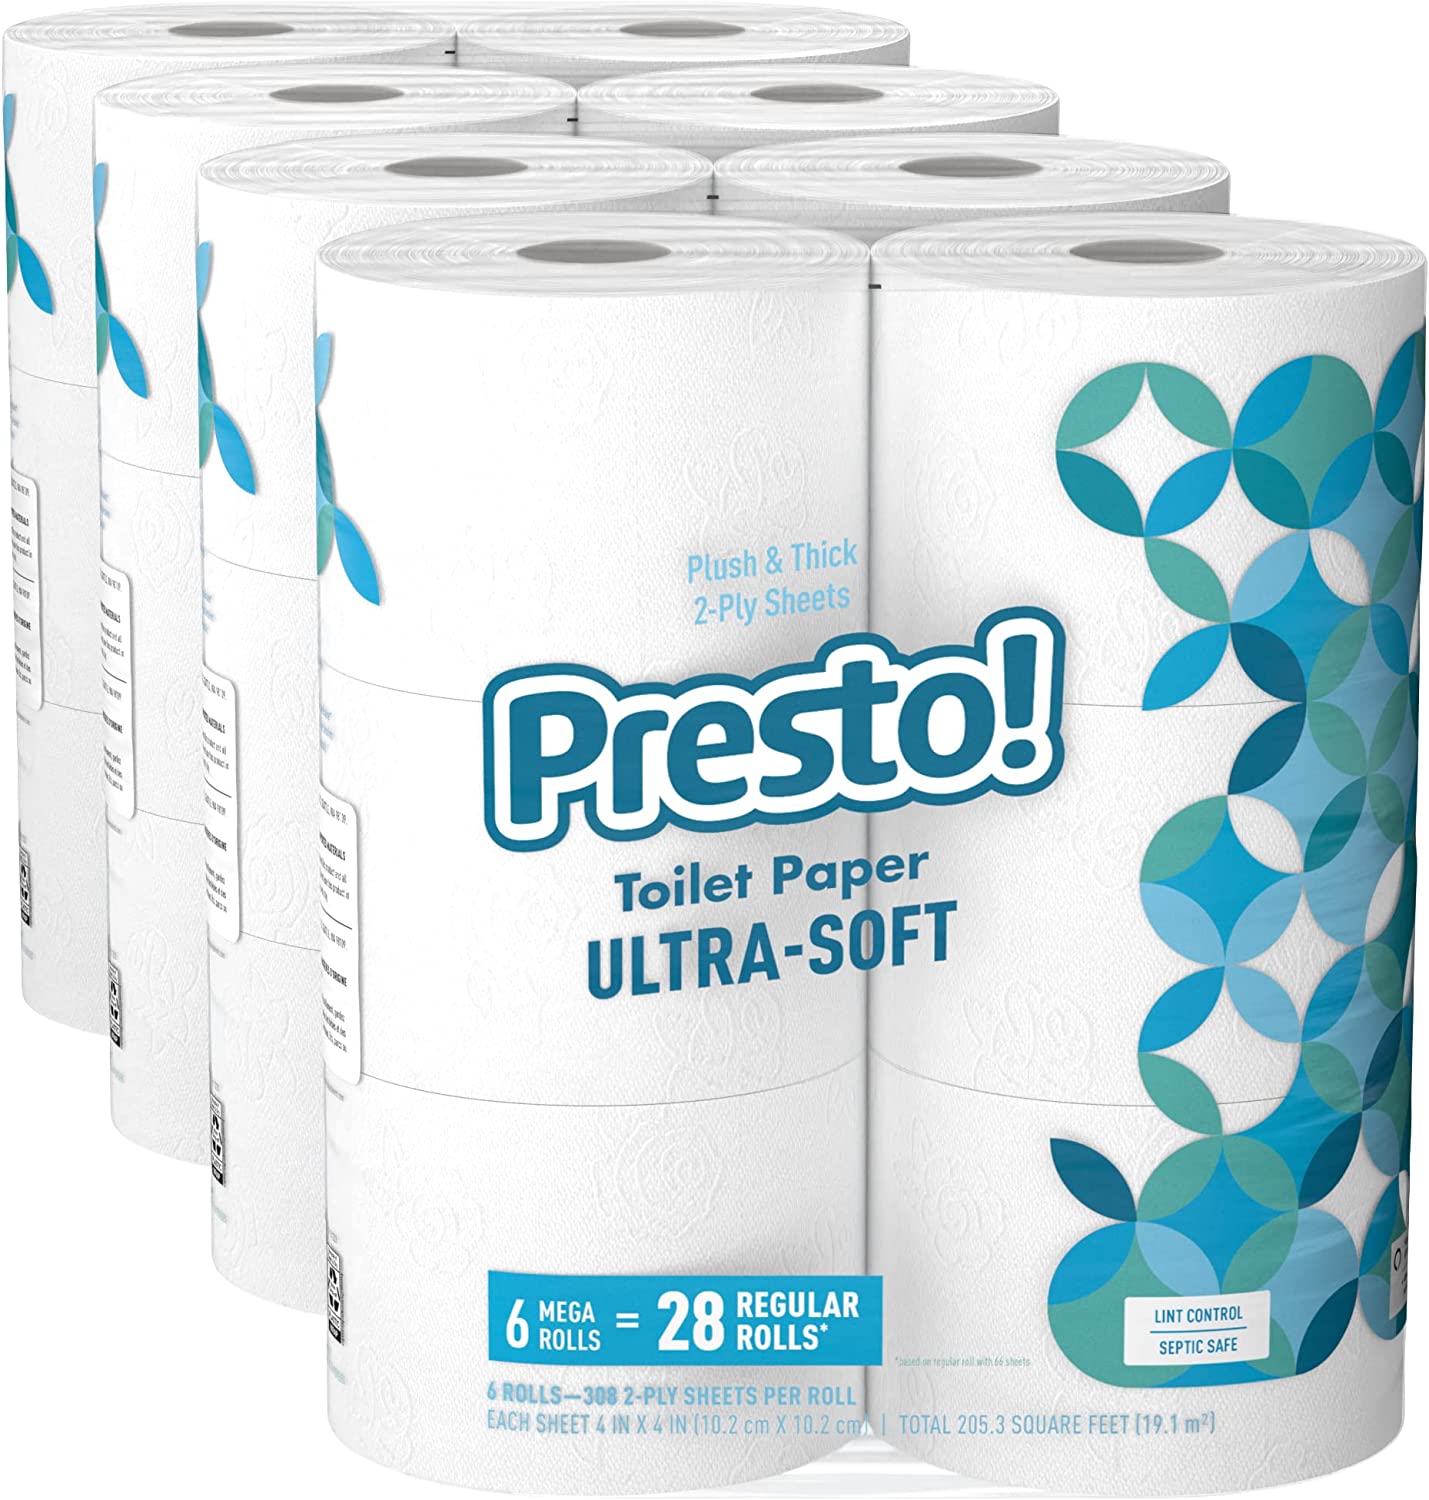 Stock and Save on Toilet Paper with Amazon